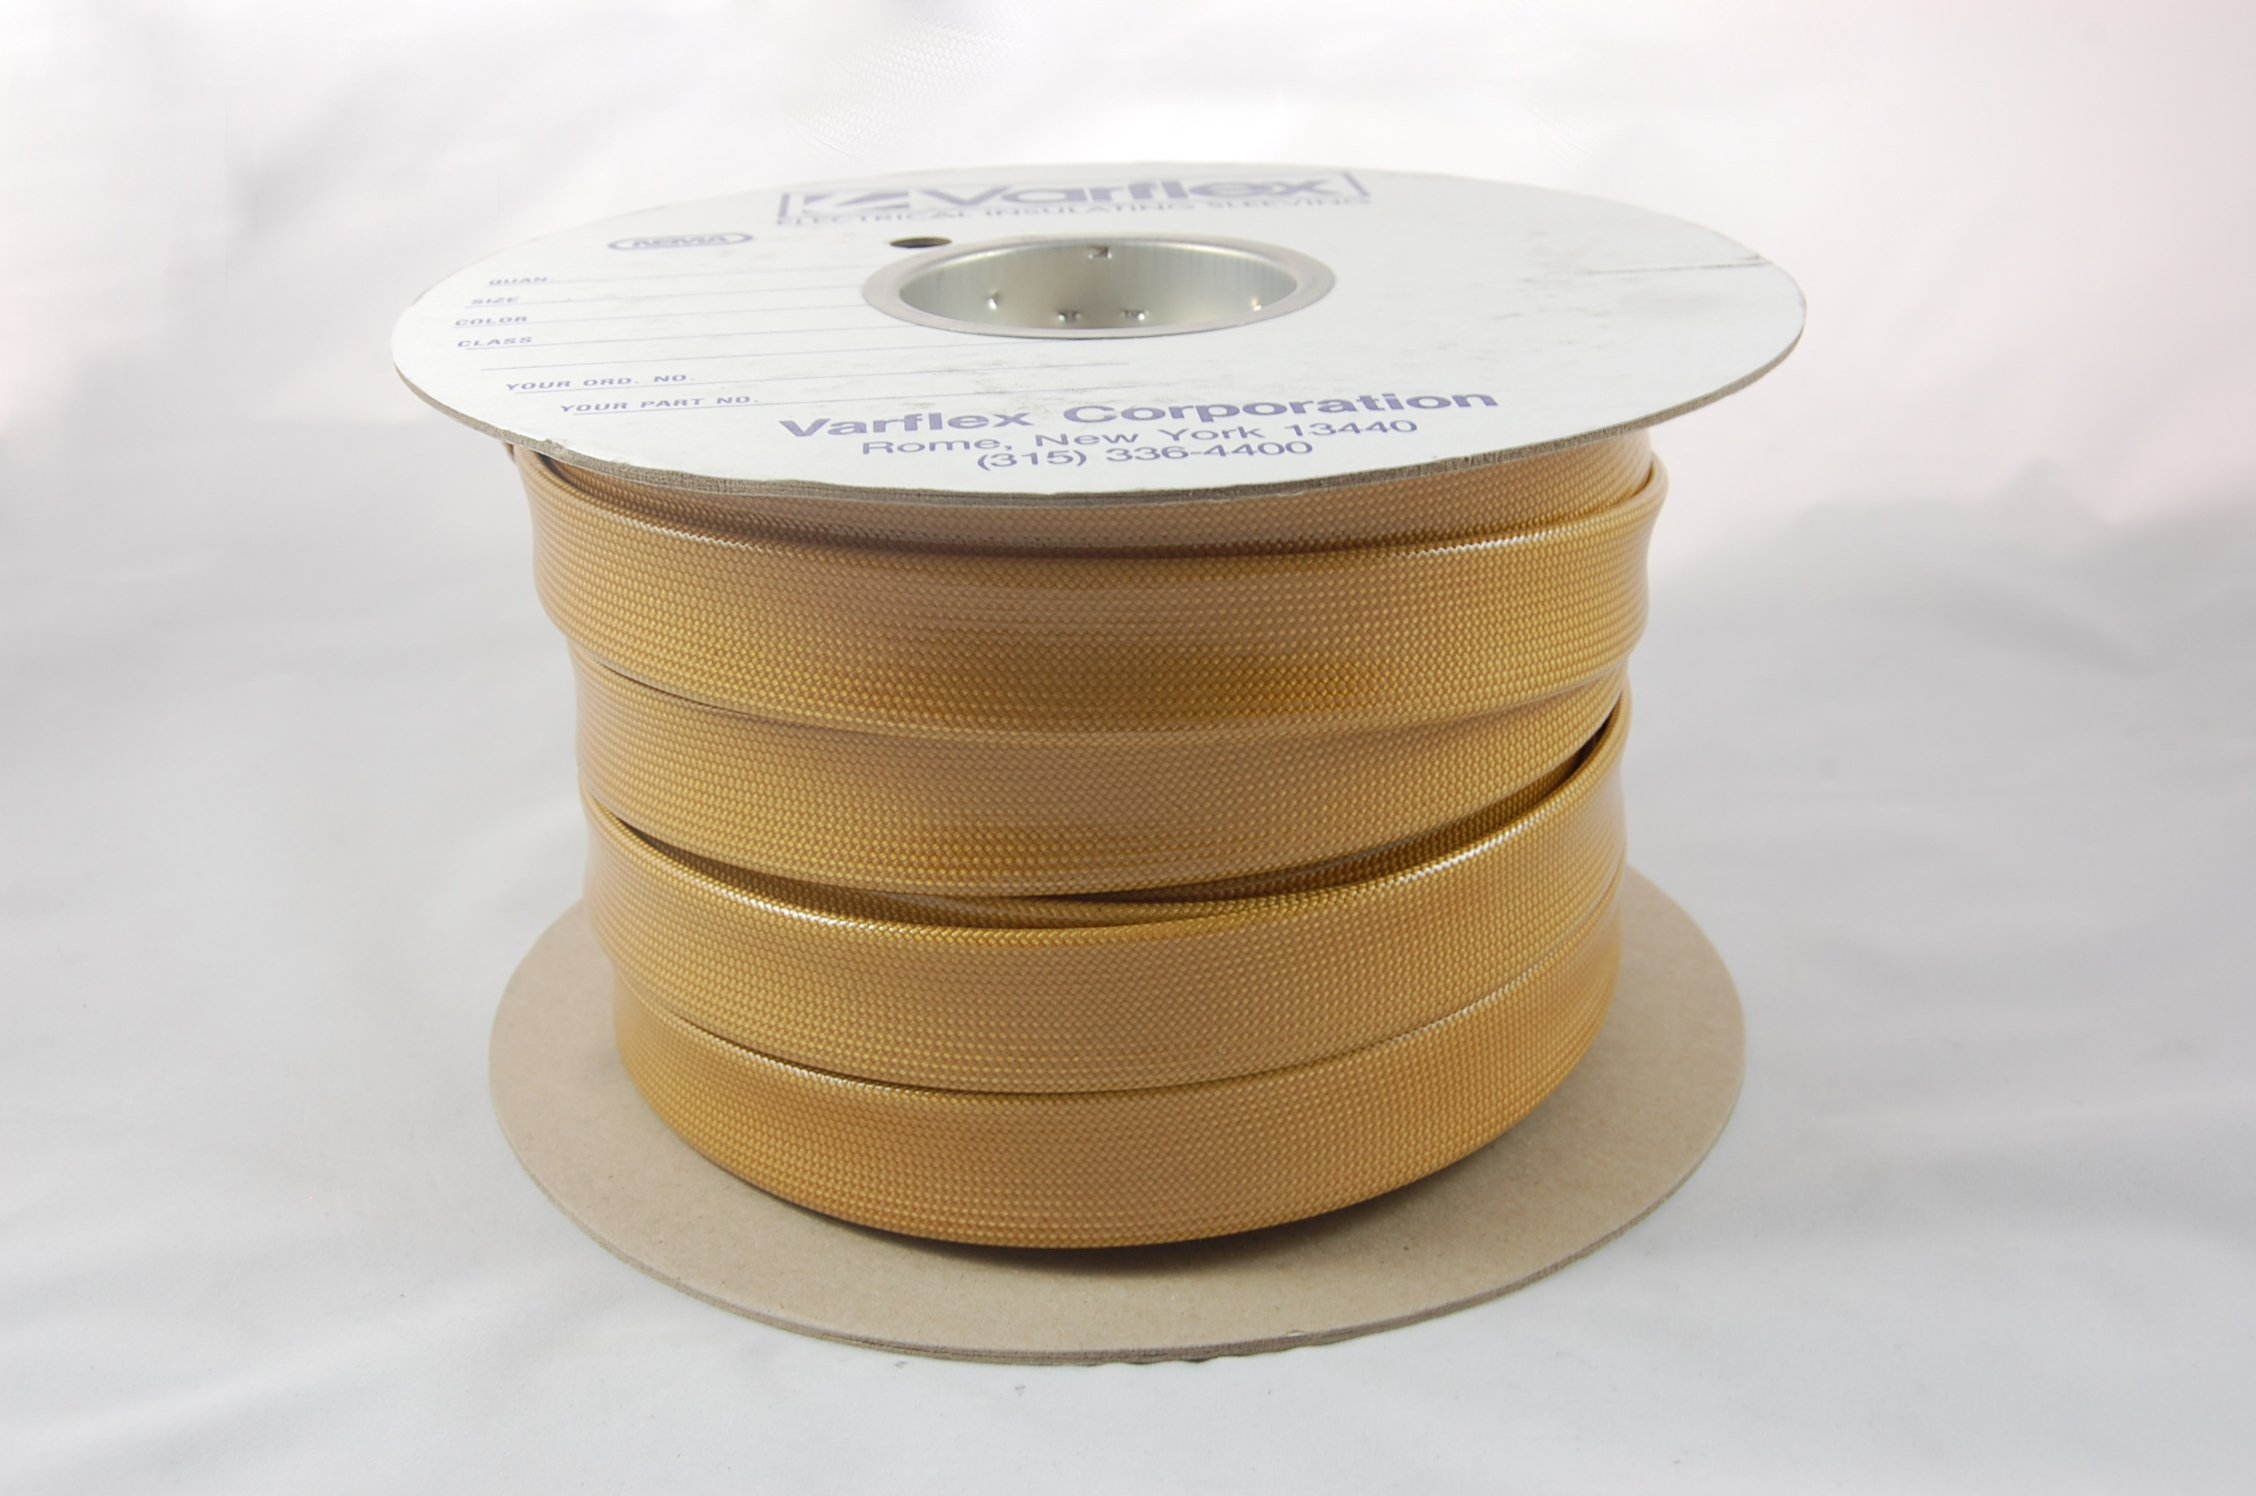 #20 AWG Varglas Silicone Resin 500 Grade H-C-1 (2500V) High Temperature Silicone Resin Coated Braided Fiberglass Sleeving 200°C, natural, 500 FT per spool